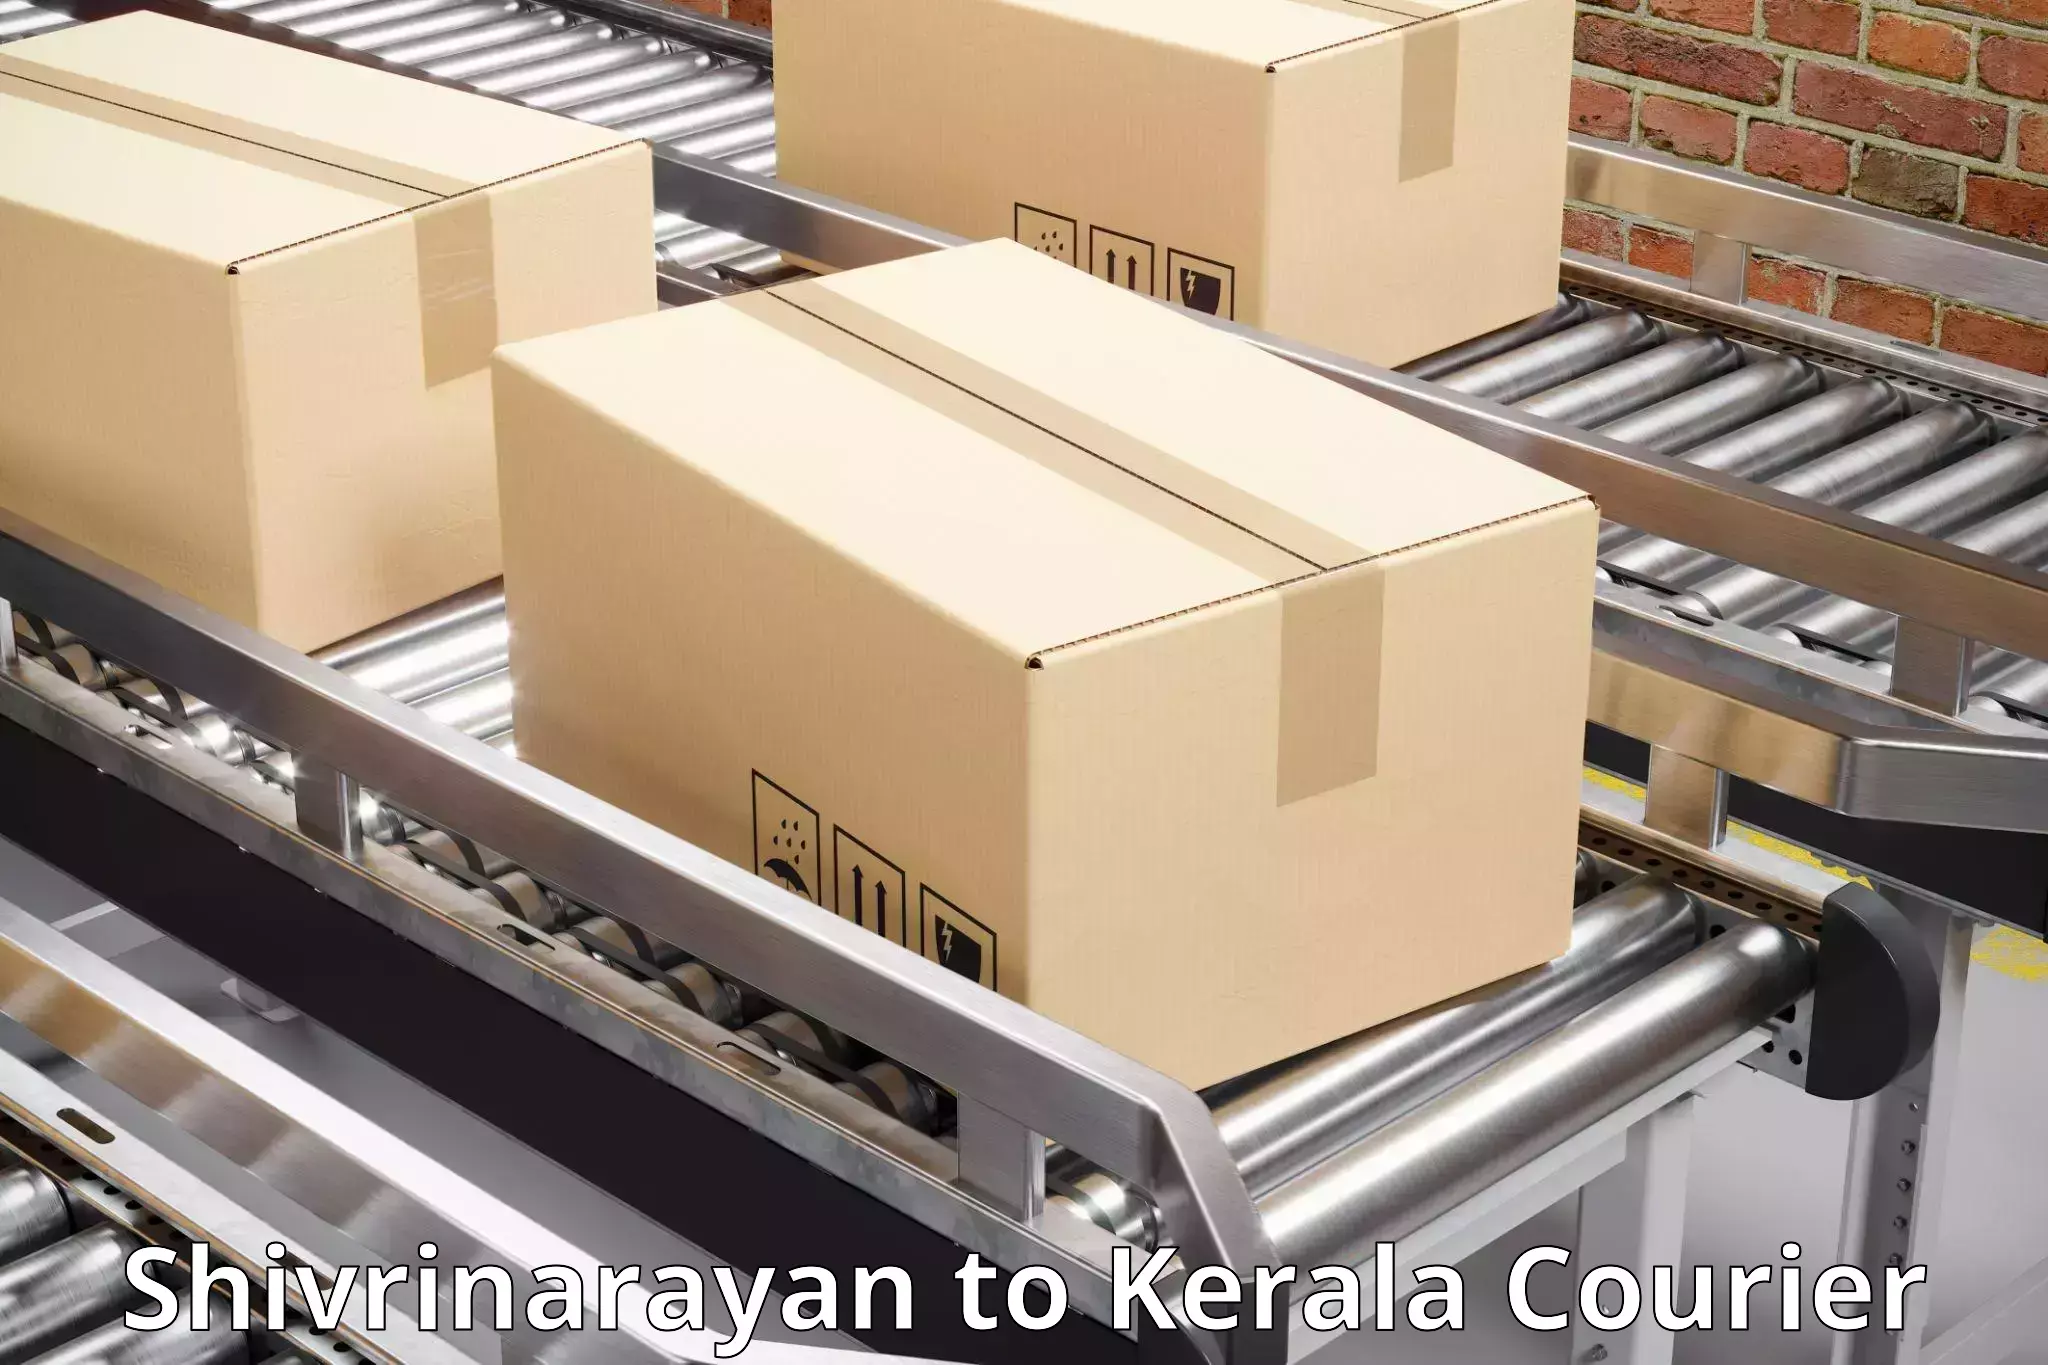 Package tracking in Shivrinarayan to Cochin University of Science and Technology